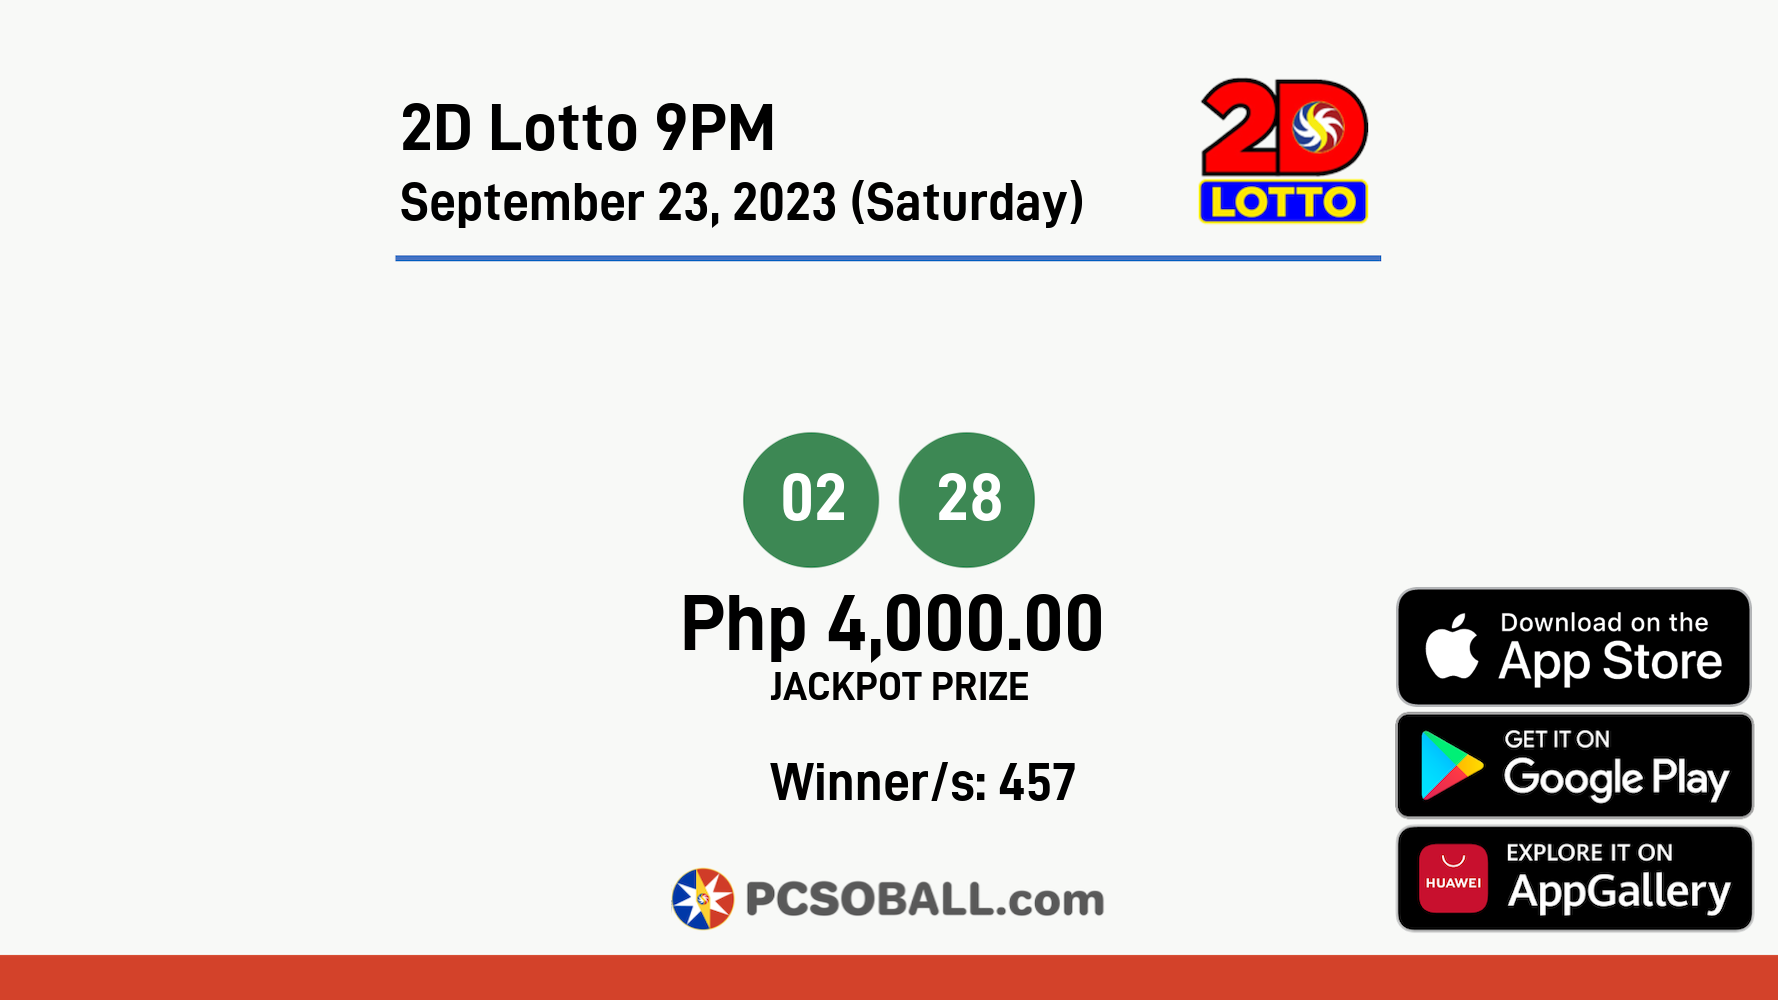 2D Lotto 9PM September 23, 2023 (Saturday) Result